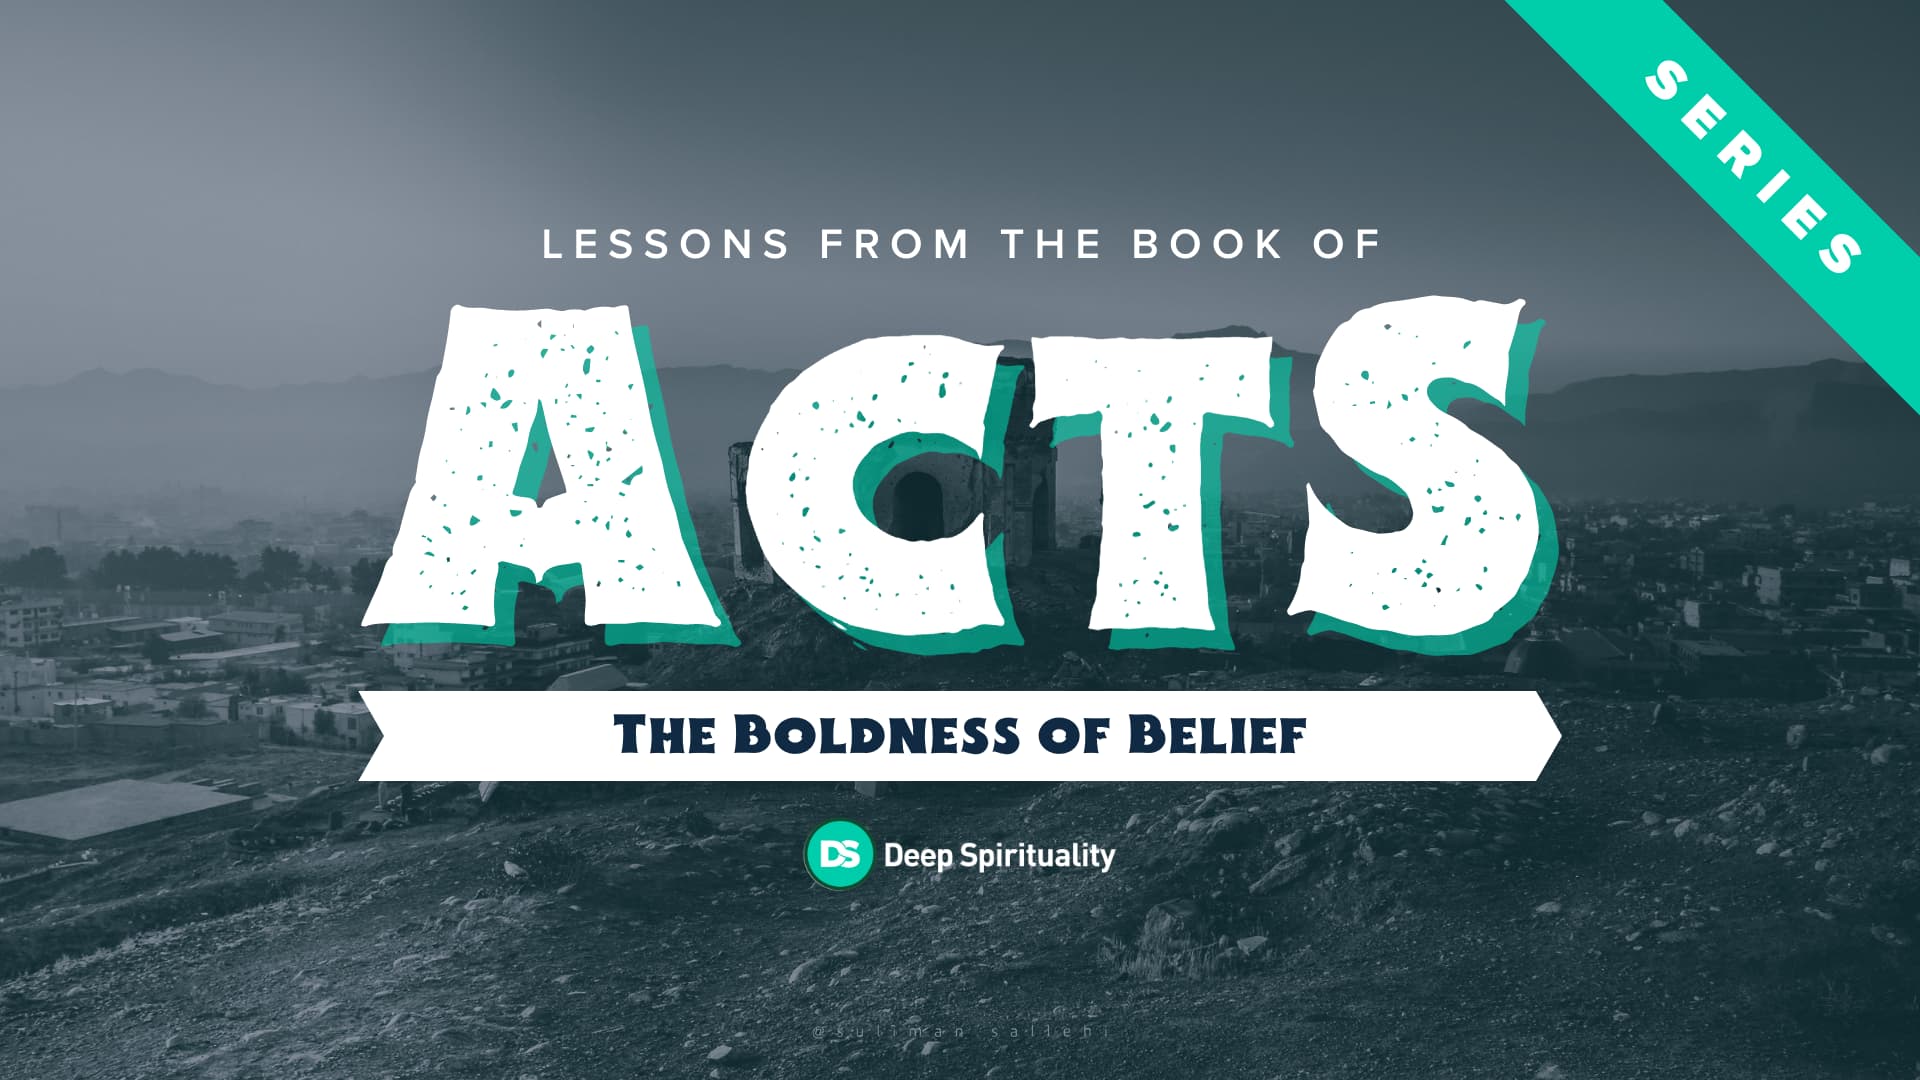 Study Series: Lessons from the Book of Acts 25